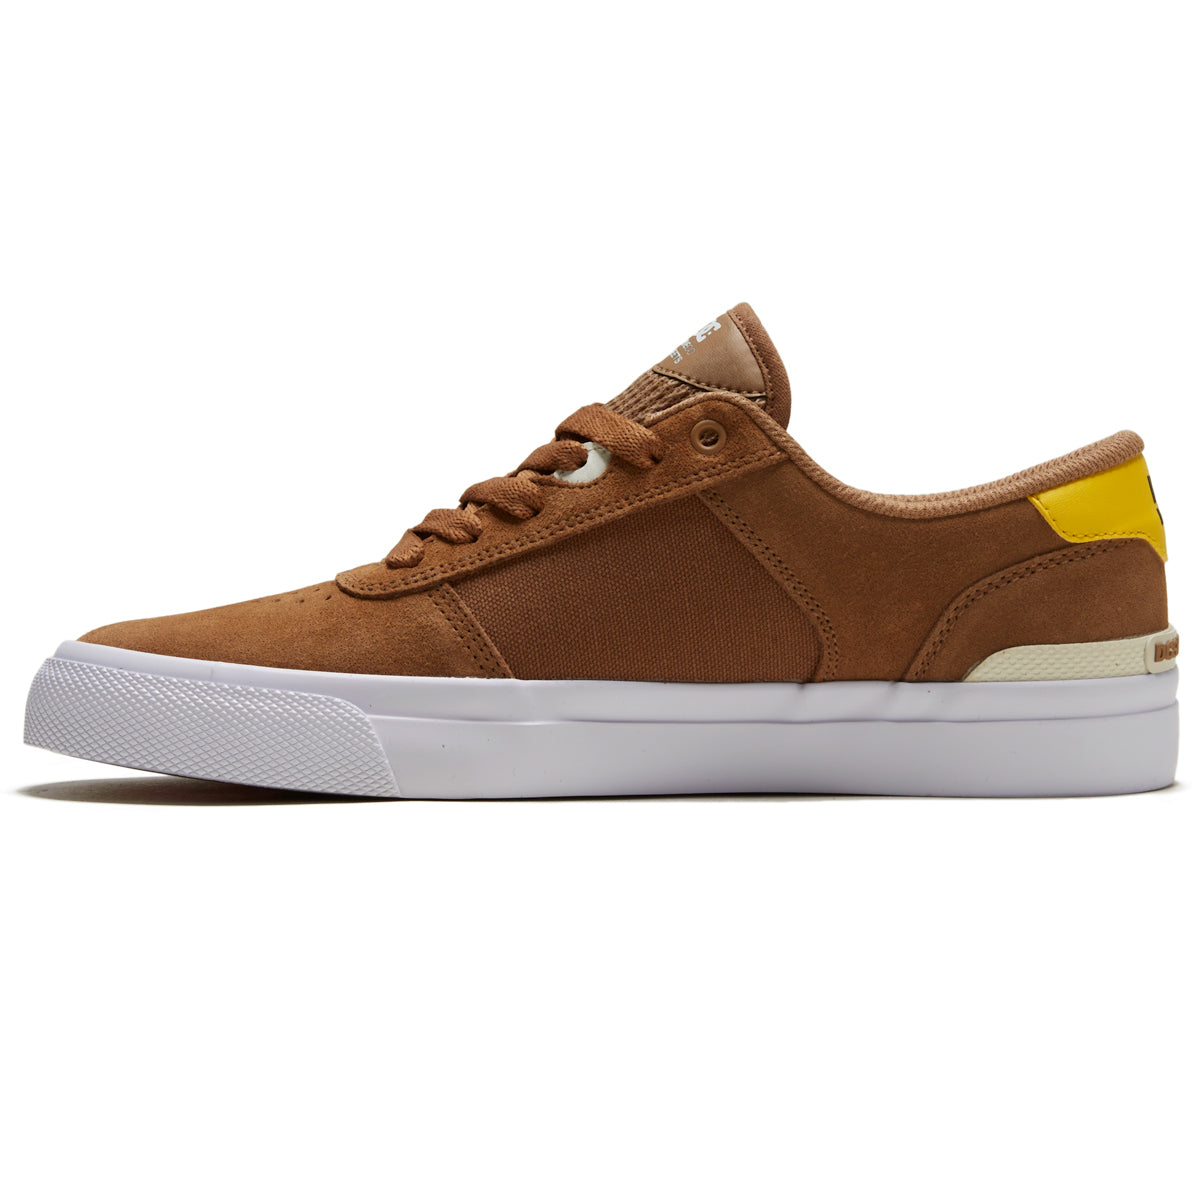 DC Teknic S Shoes - Brown/Yellow image 2